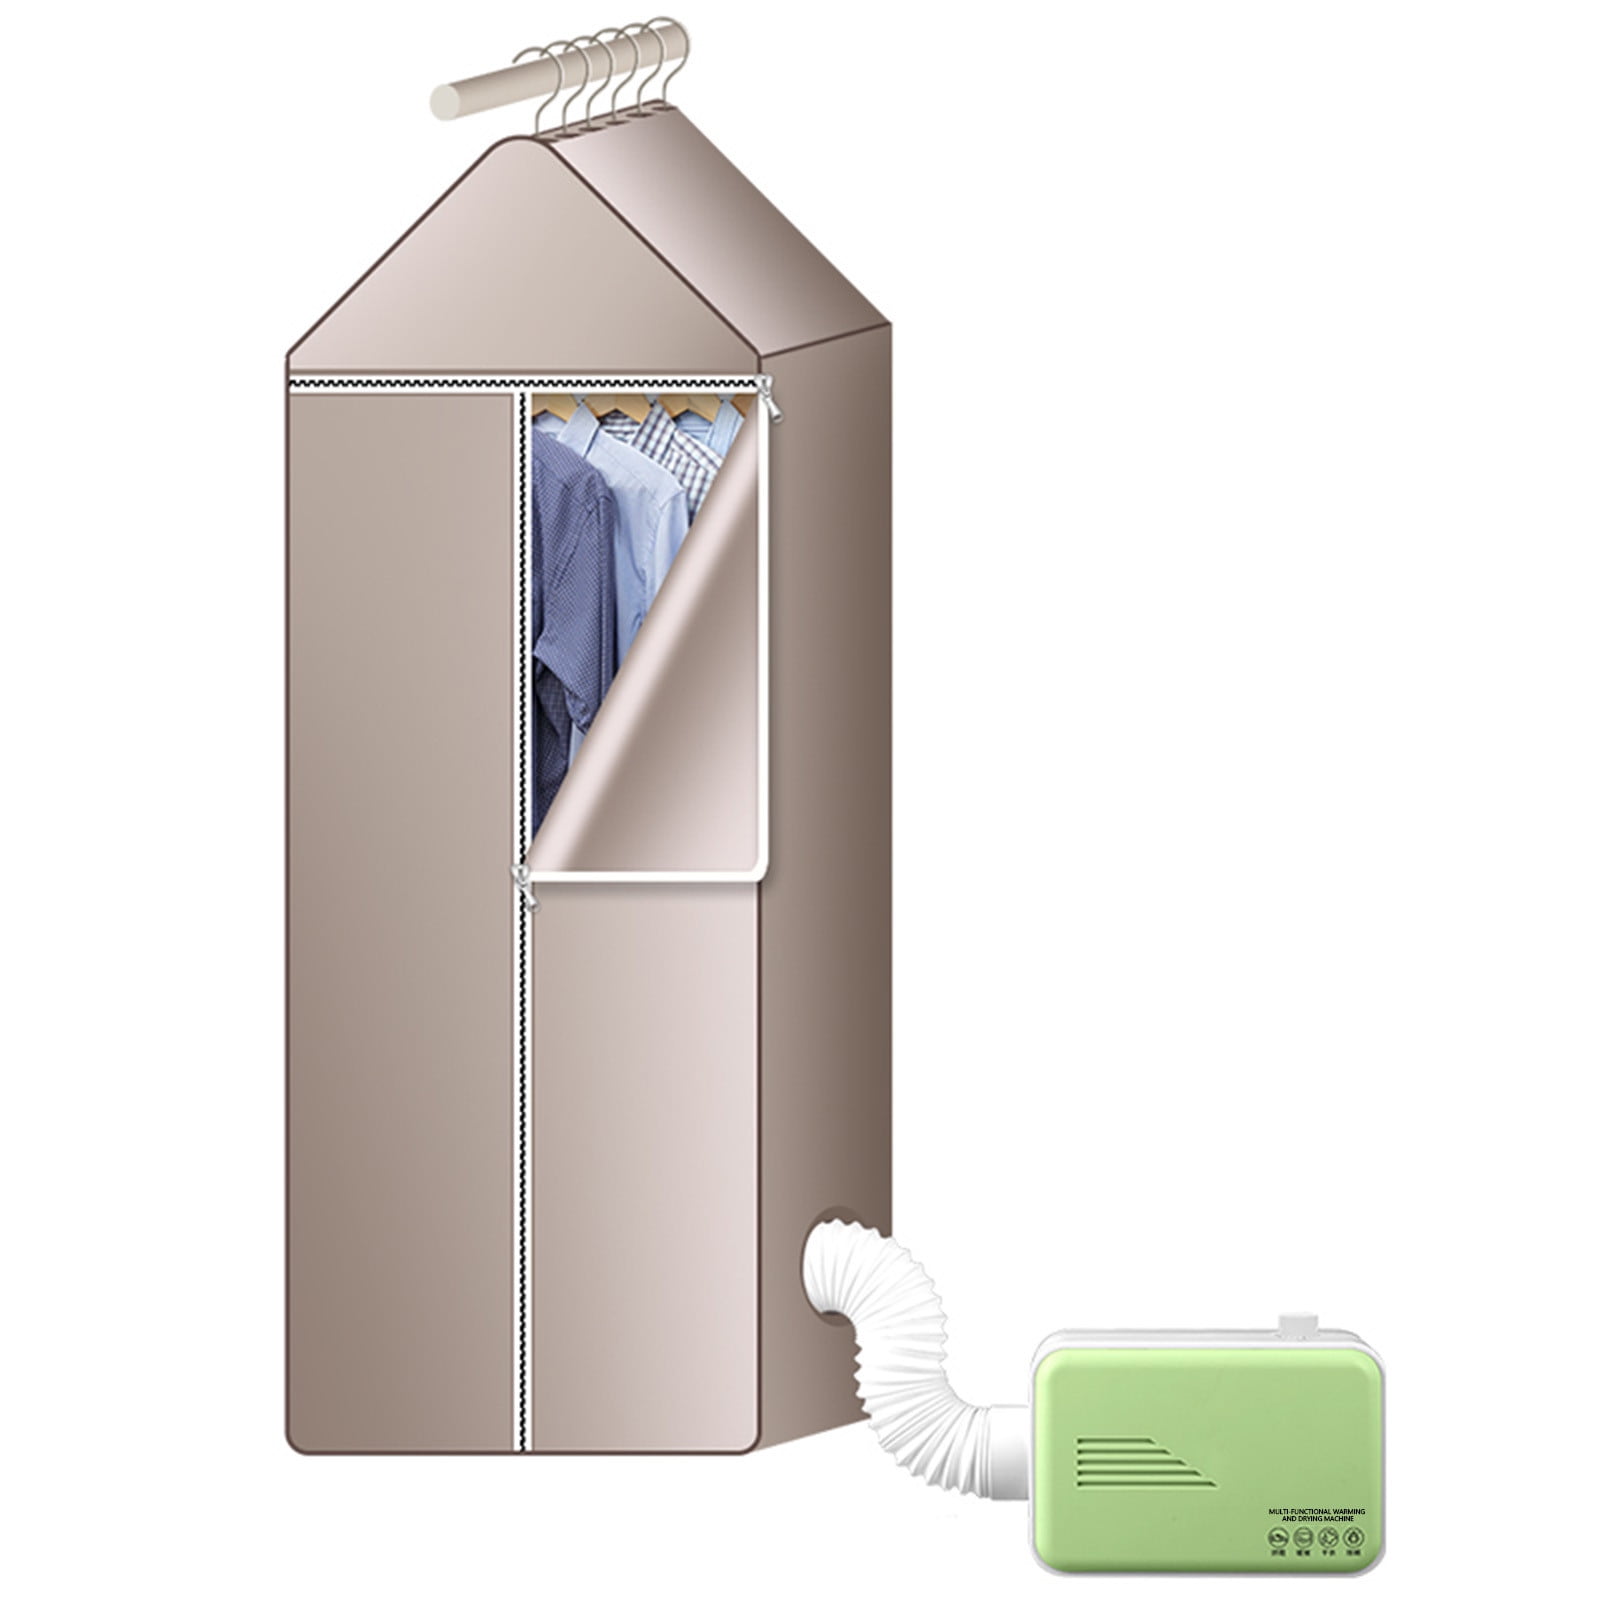 800W Electric Indoor Portable Clothes Dryer - Inspire Uplift